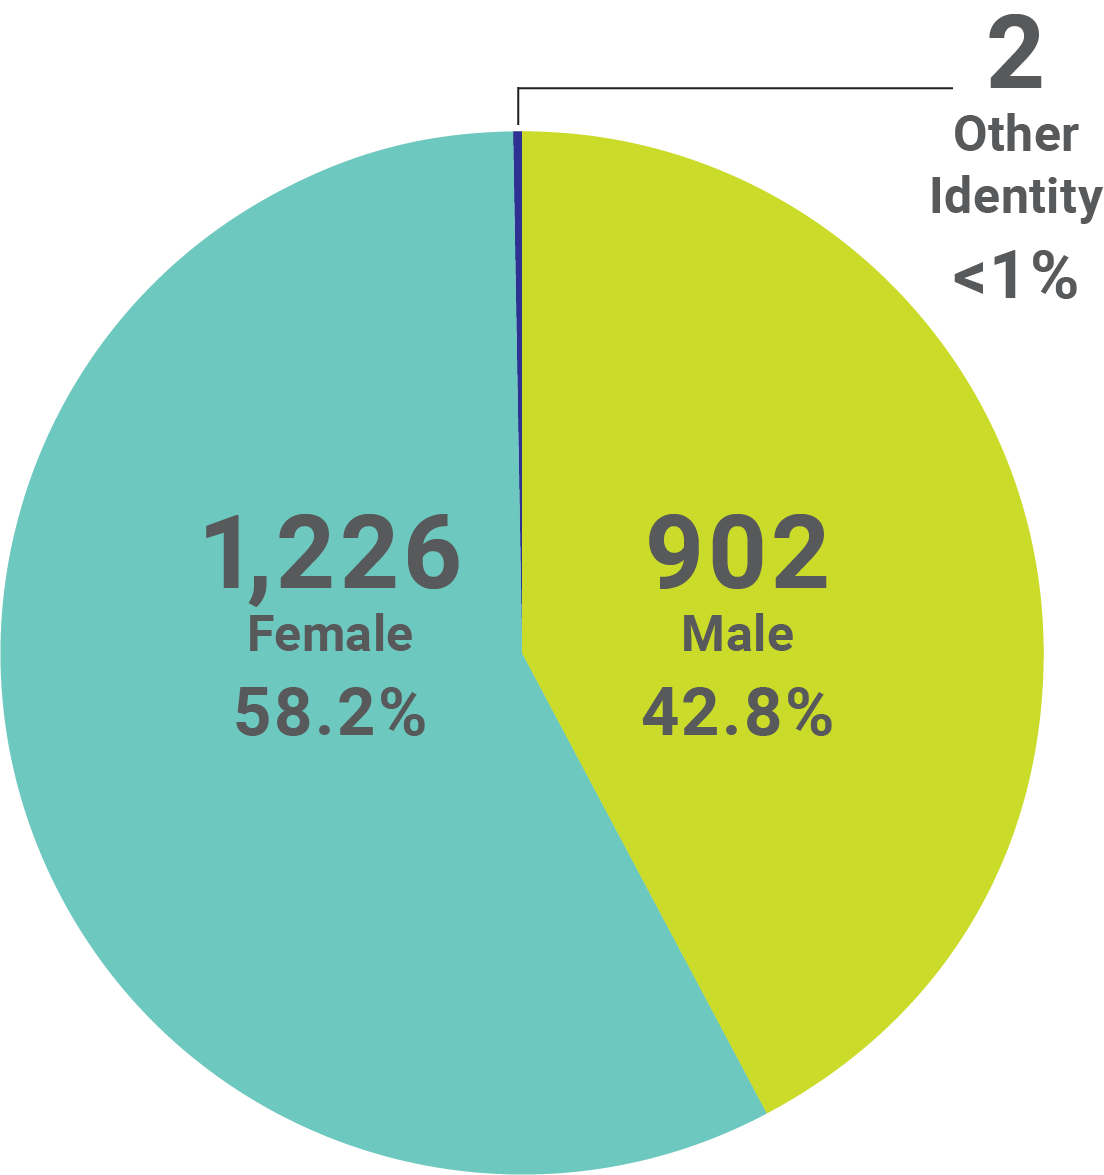 Graphic showing the demographics of staff by Gender Identity. Male with 902 at 42.8%, Female with 1,226 at 58.2%, and Other Identity with 2 at less than 1%. 